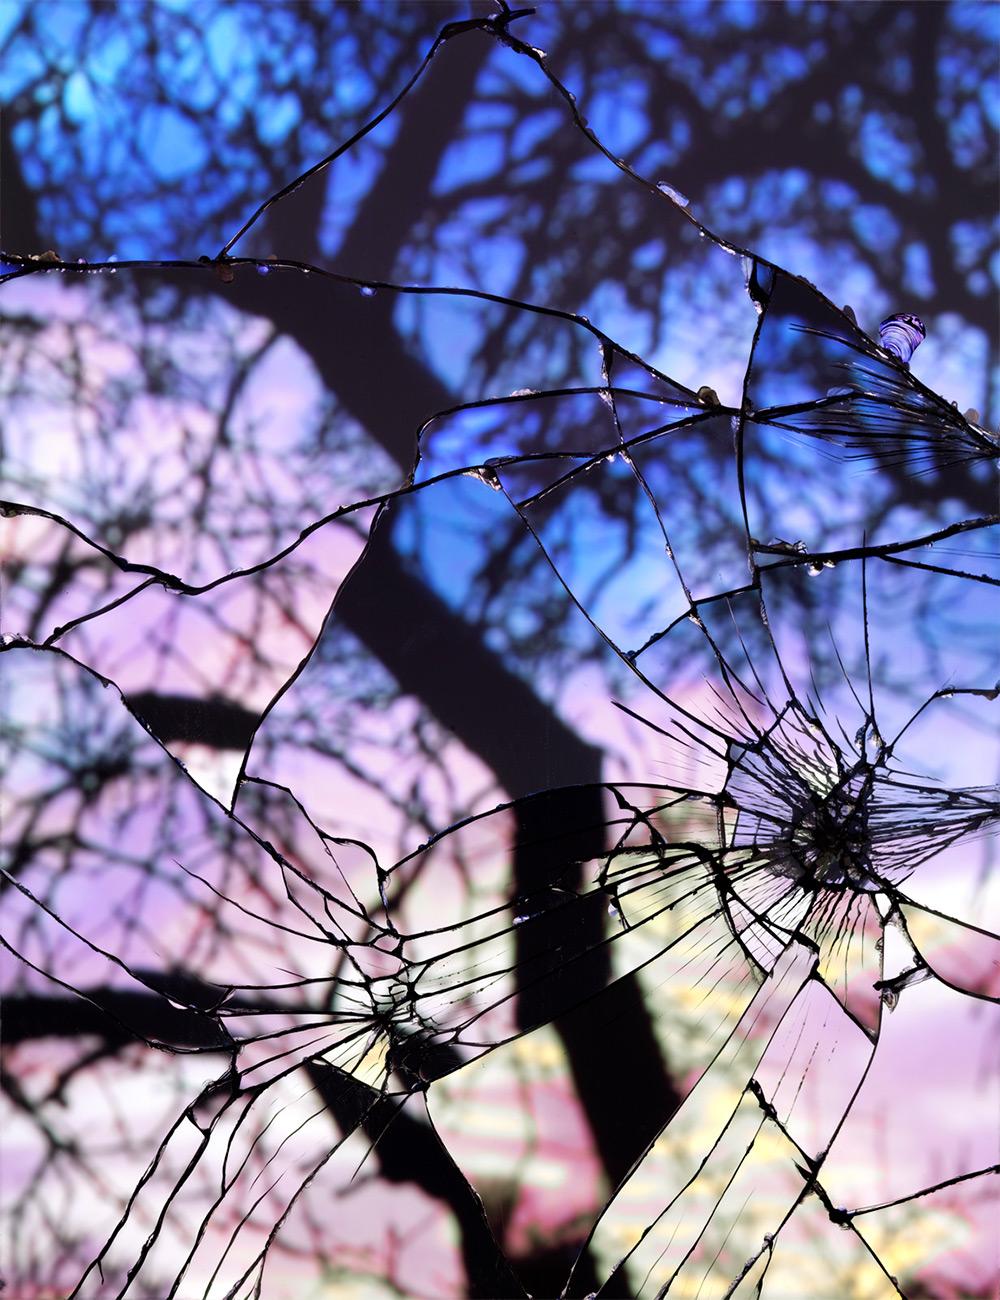 Photographs of Reflected Sunsets through Shattered Mirrors